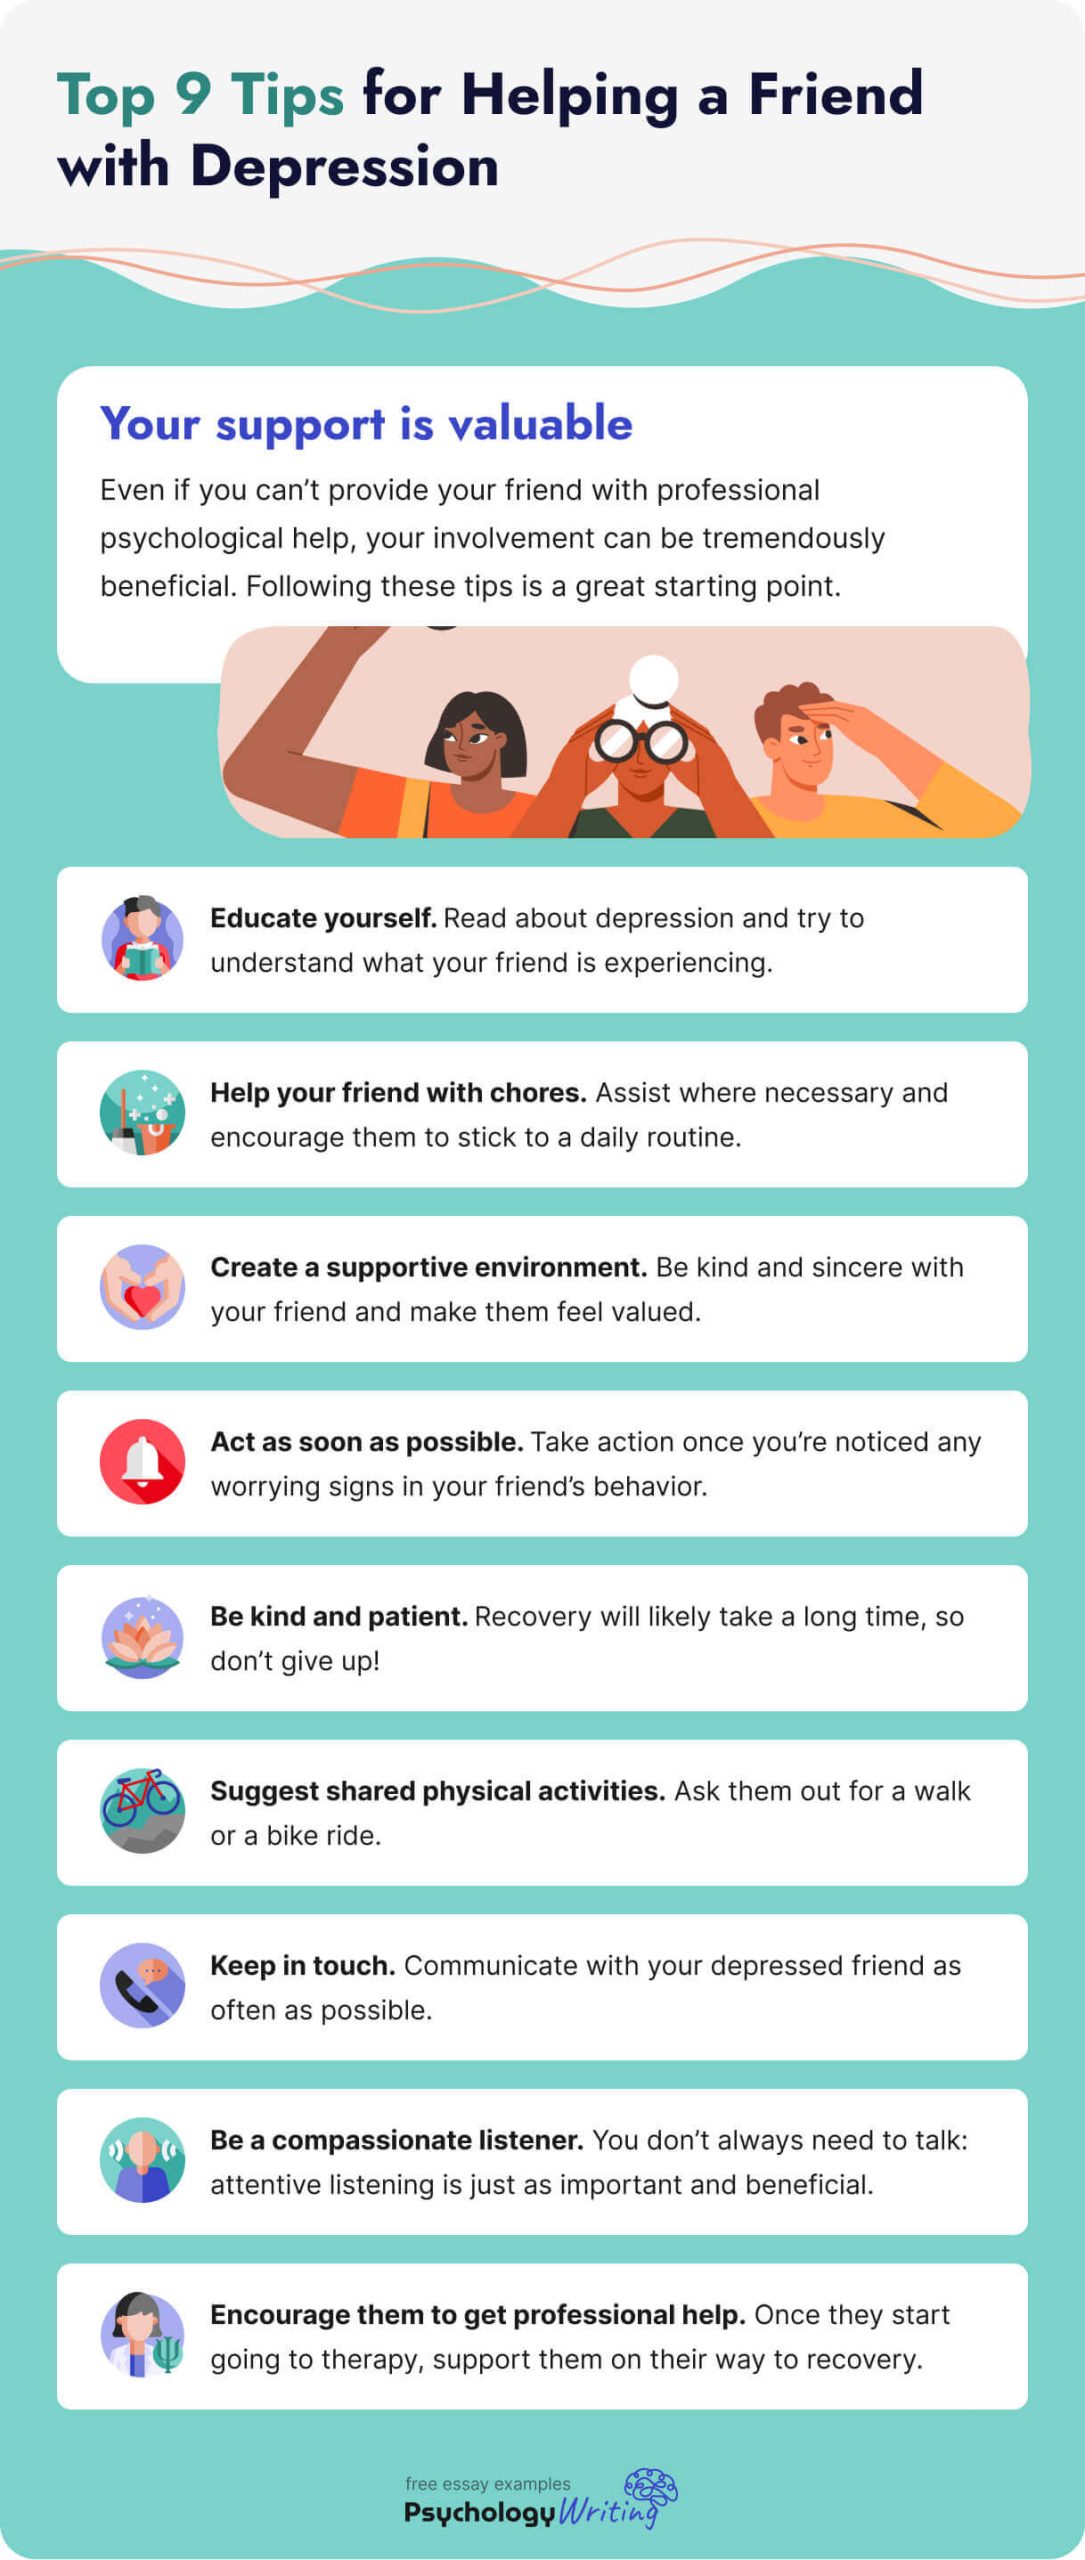 The picture enumerates the top 9 tips for helping a depressed friend.